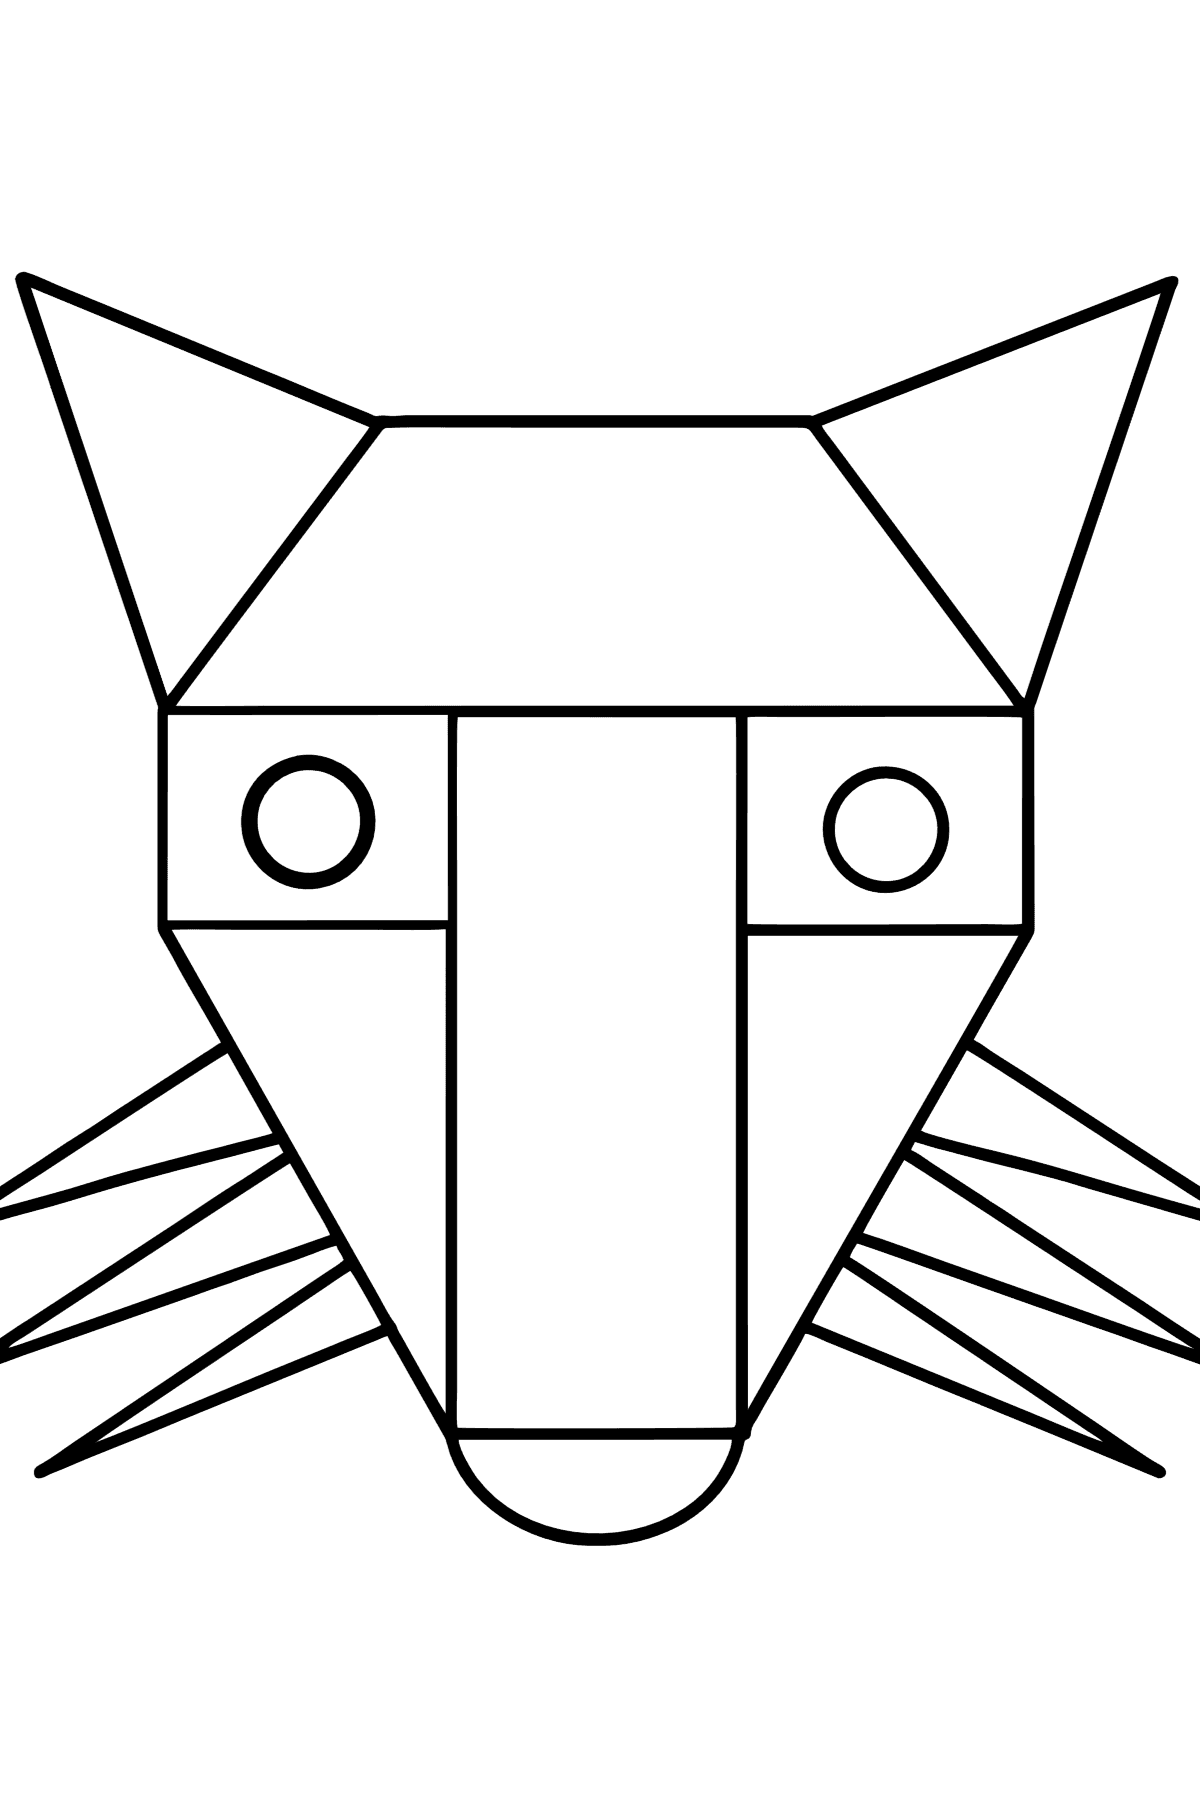 Geometric Chanterelle coloring page - Coloring Pages for Kids